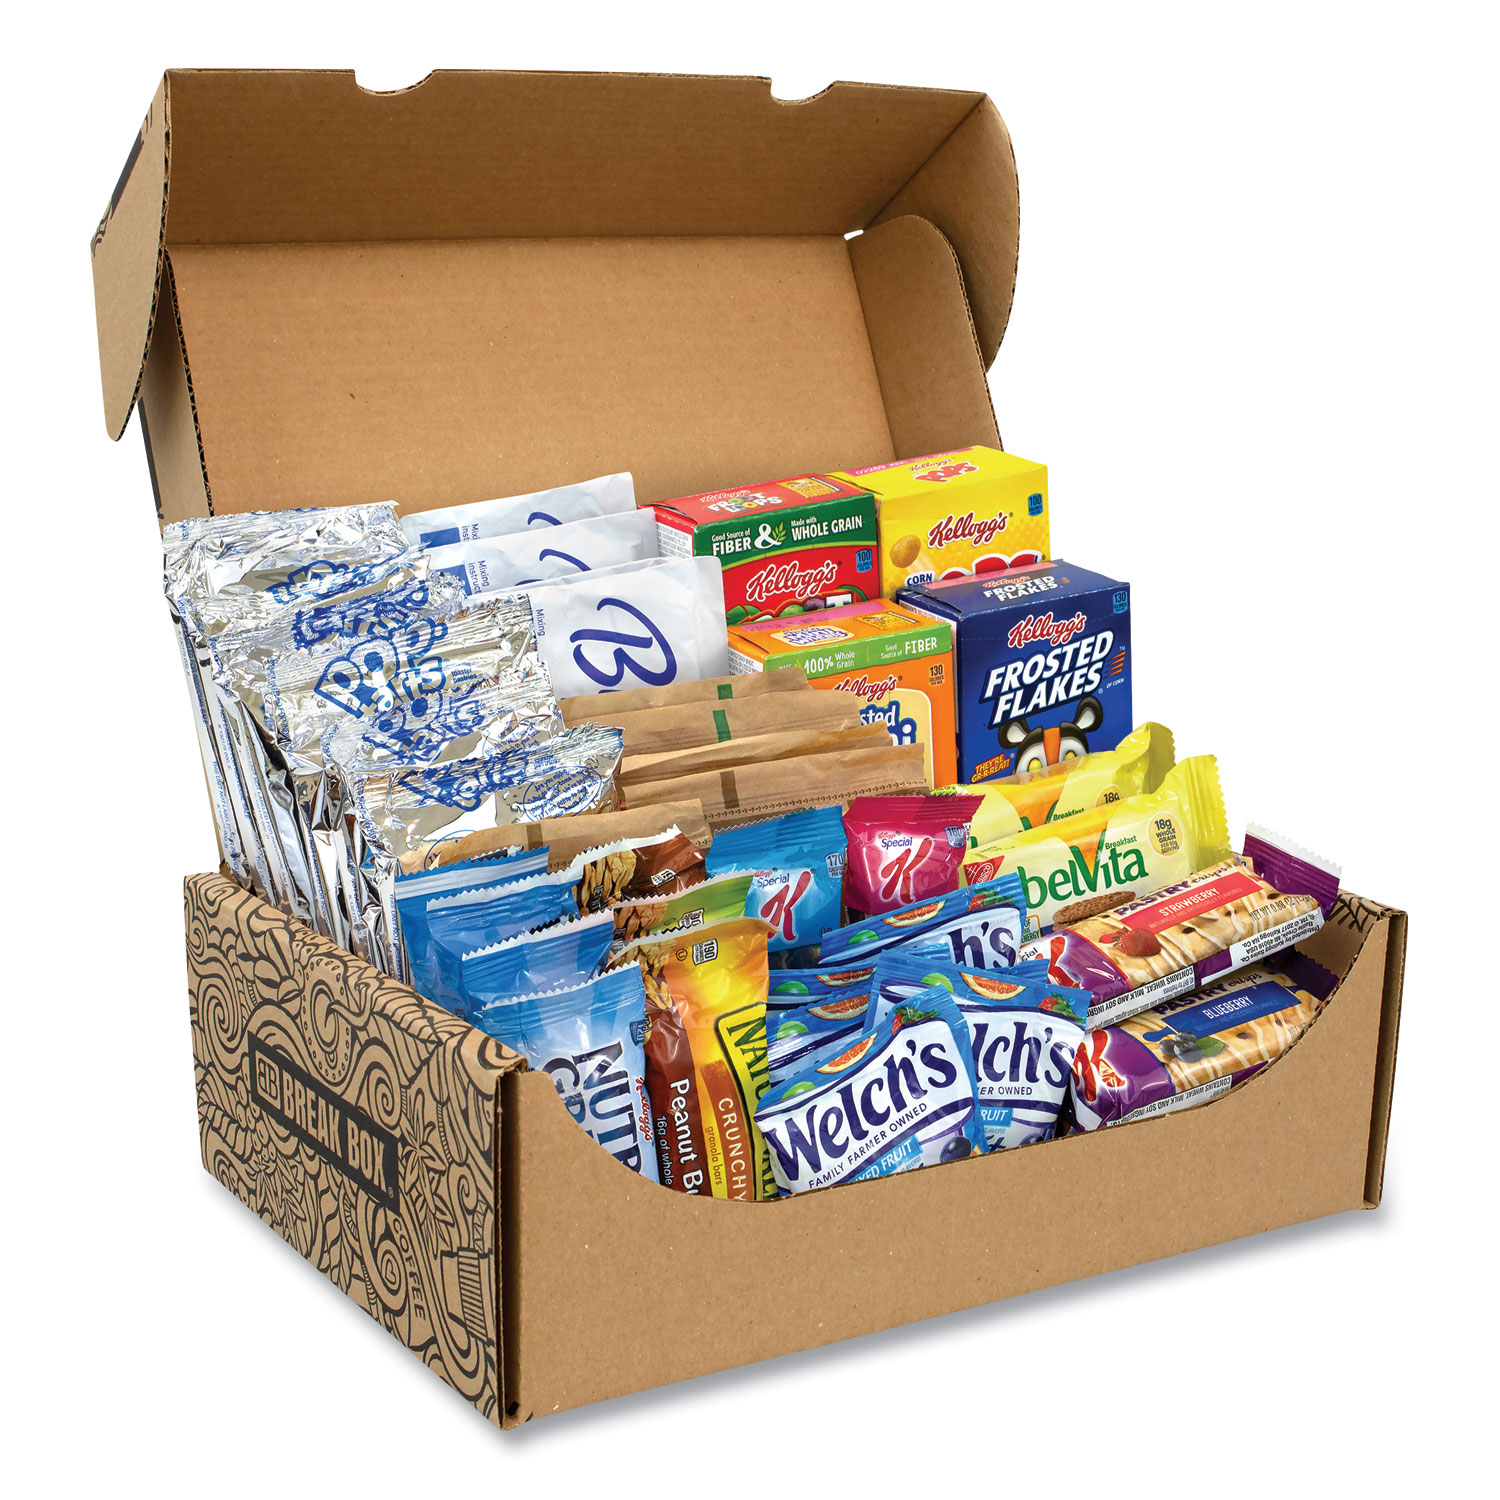  Snack Box Pros 70000002 Breakfast Snack Box, 41 Assorted Snacks, Free Delivery in 1-4 Business Days (GRR700S0002) 